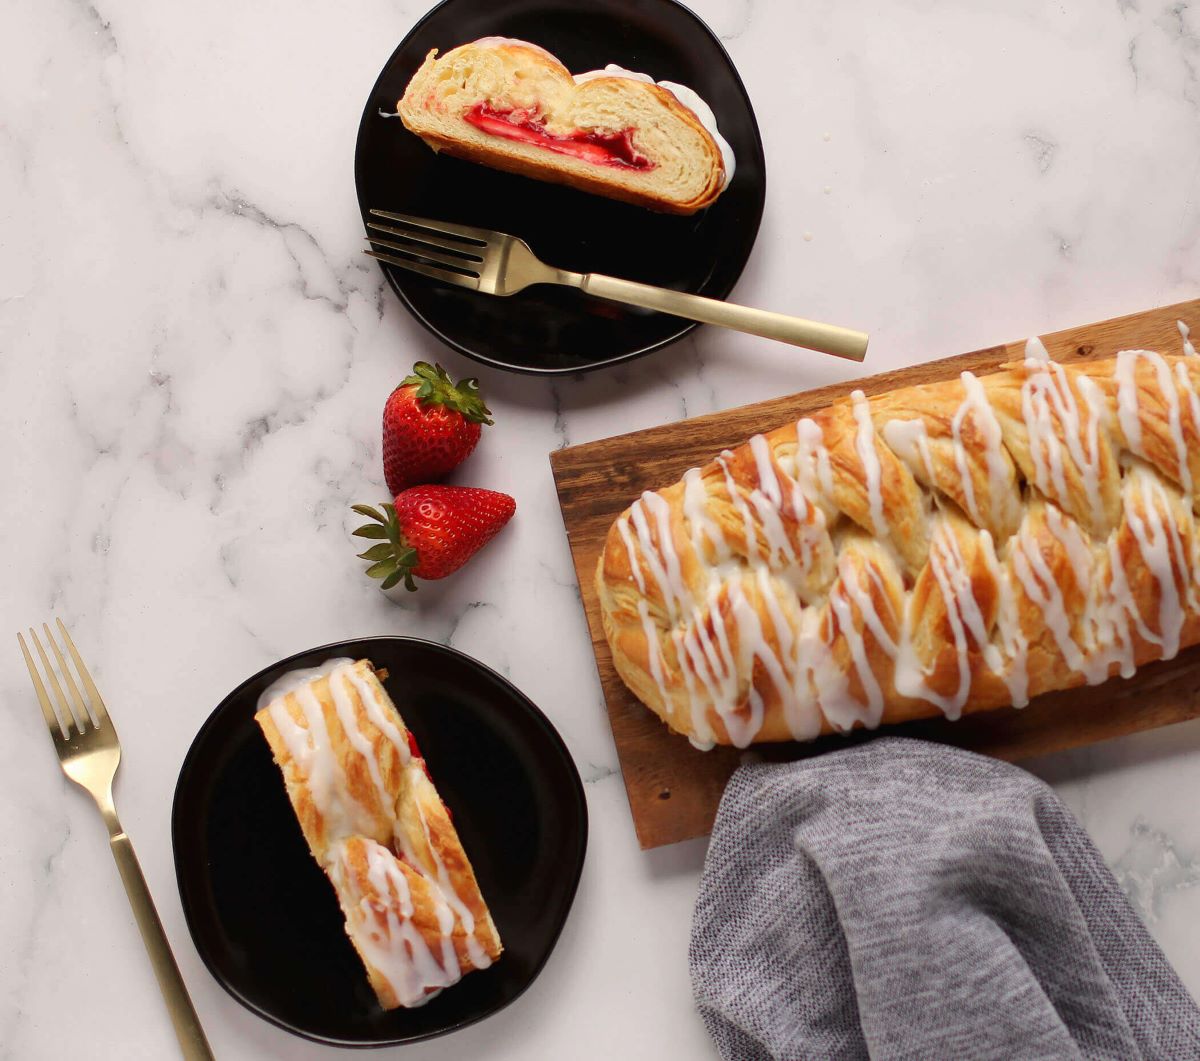 Strawberry Cream Cheese Butter Braid Pastry next to two plates with slices of pastry, forks, and strawberries